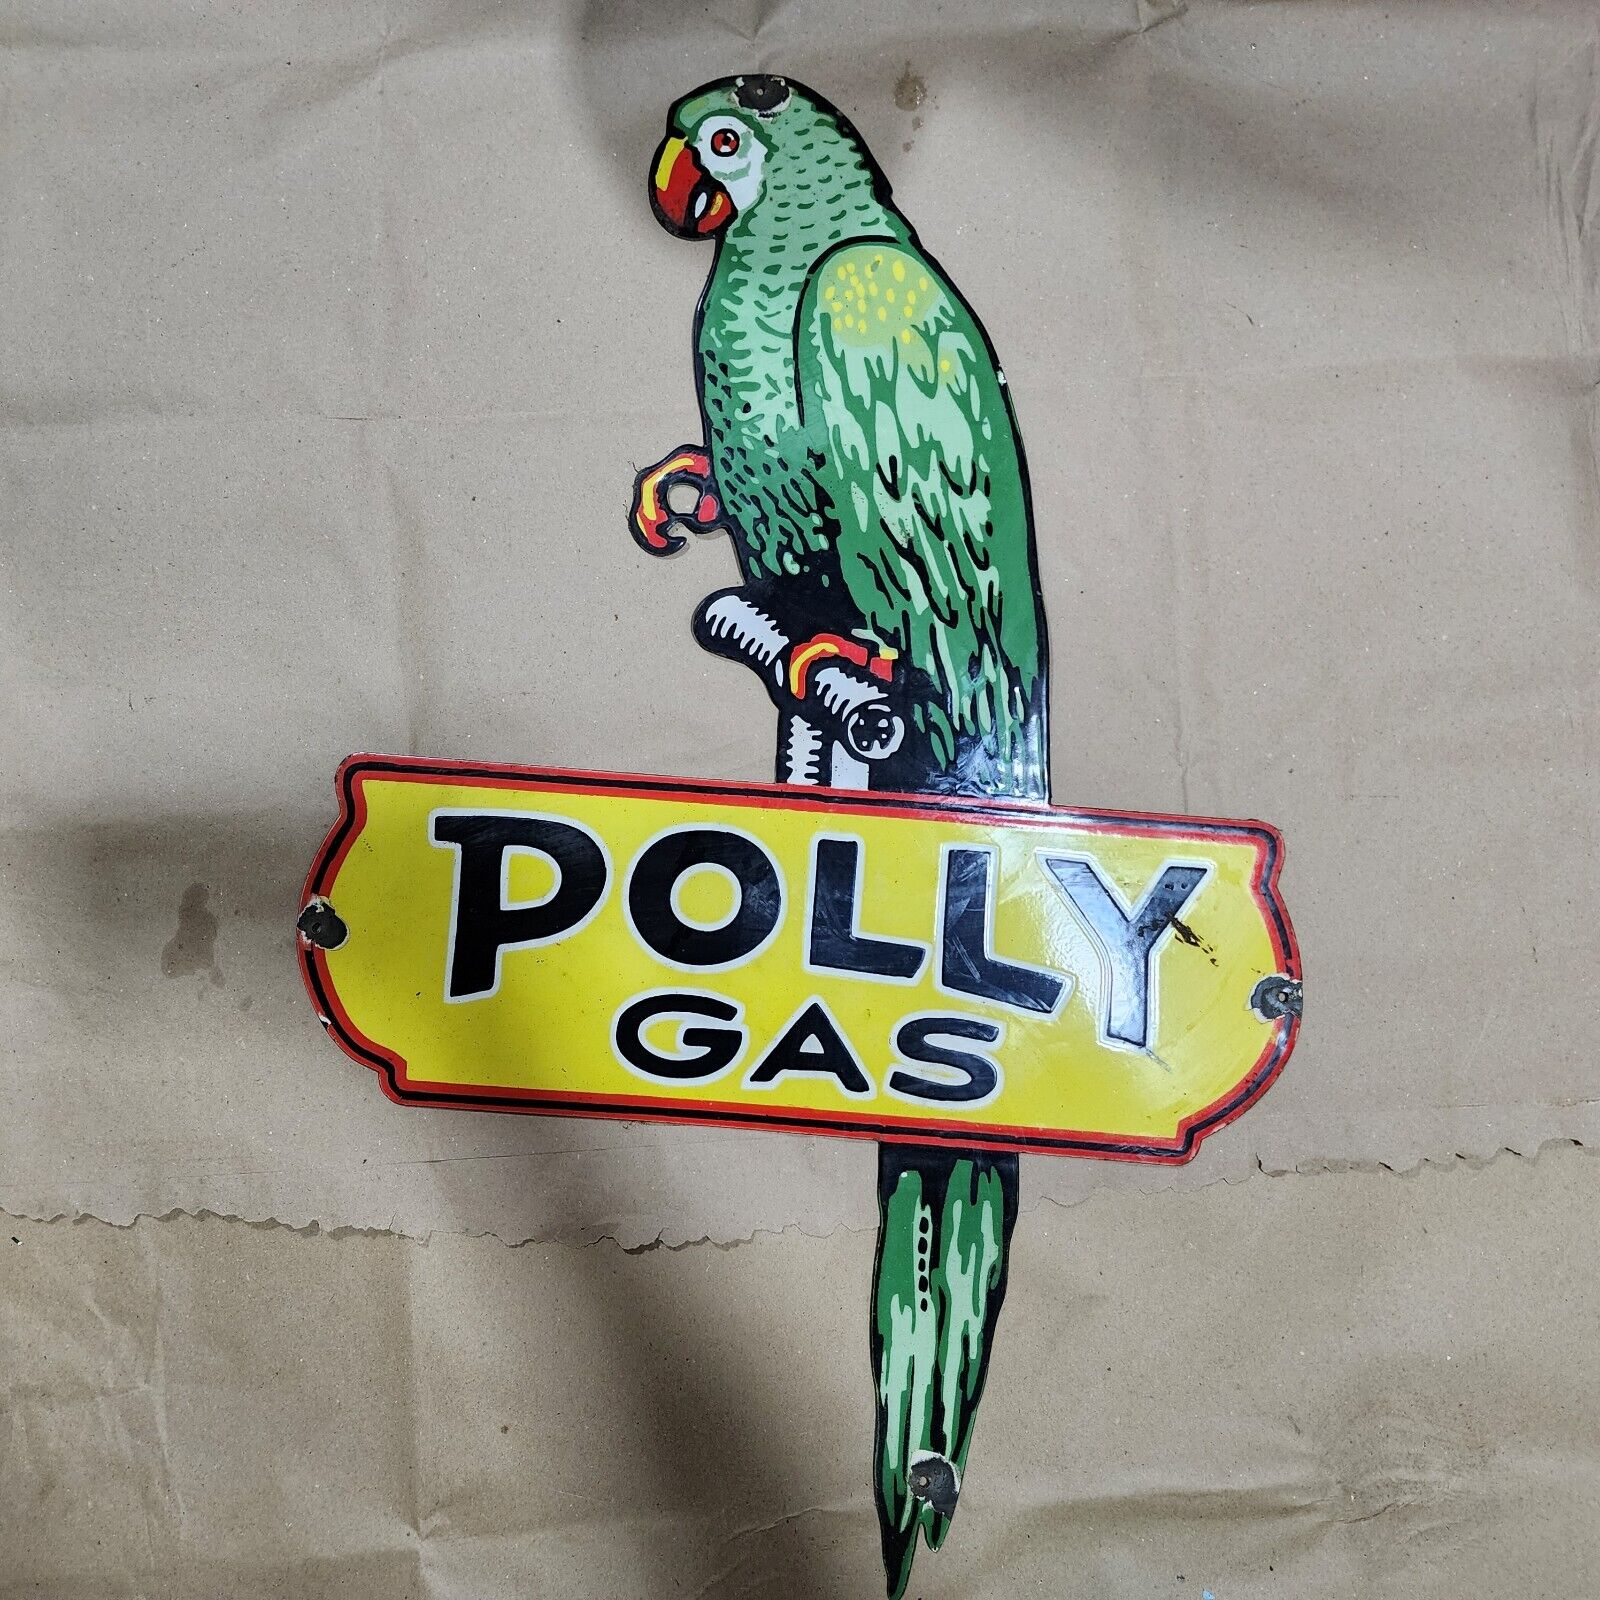 POLLY GAS PARROT PORCELAIN ENAMEL SIGN 23 X 35 1/2 INCHES